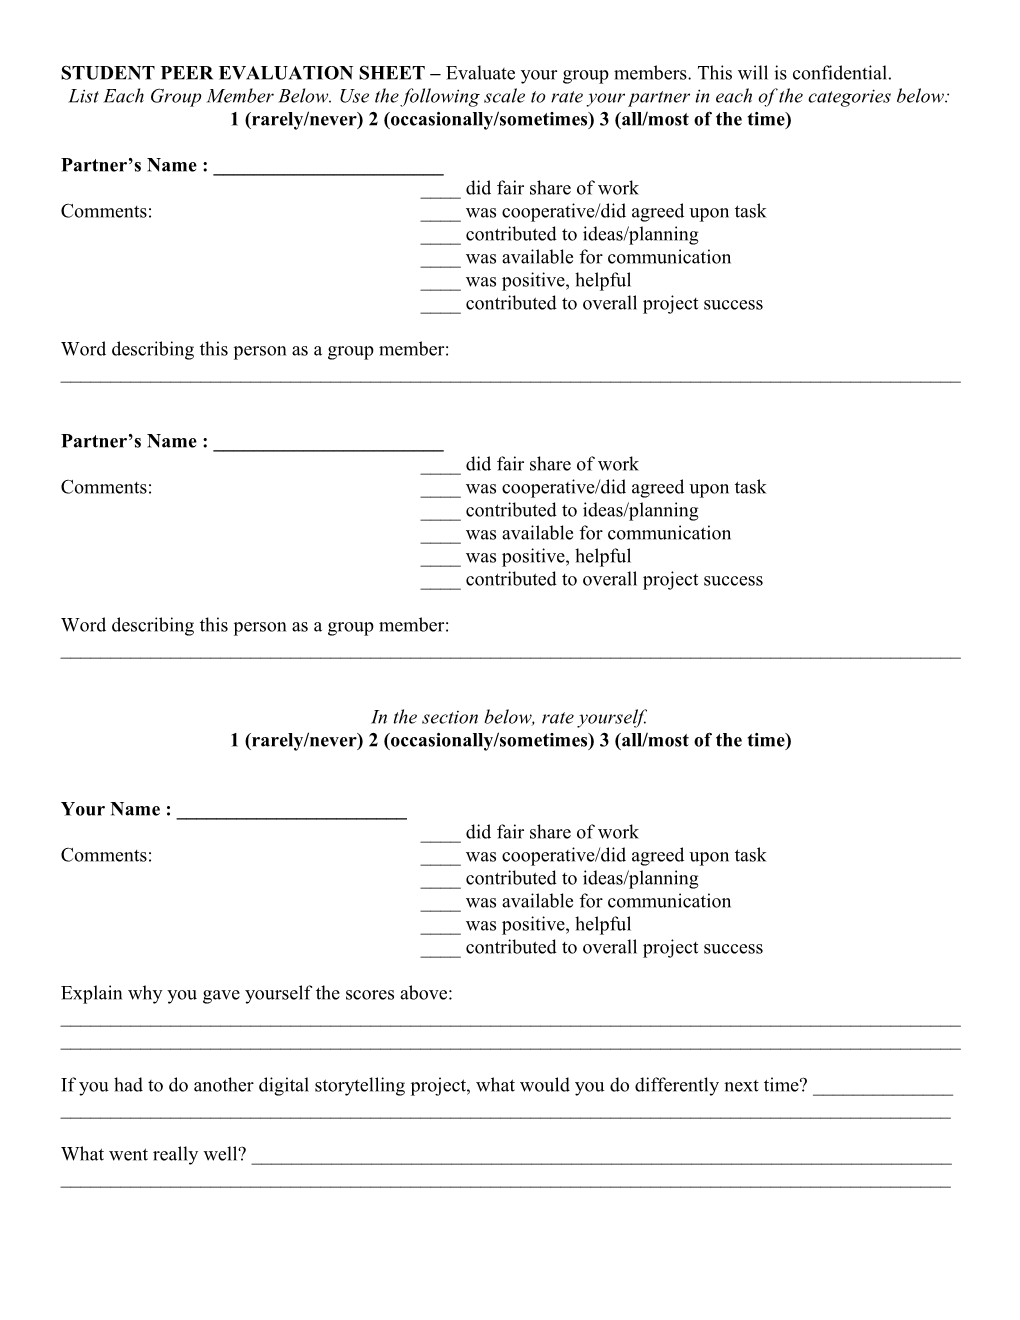 STUDENT PEER EVALUATION SHEET Evaluate Your Group Members